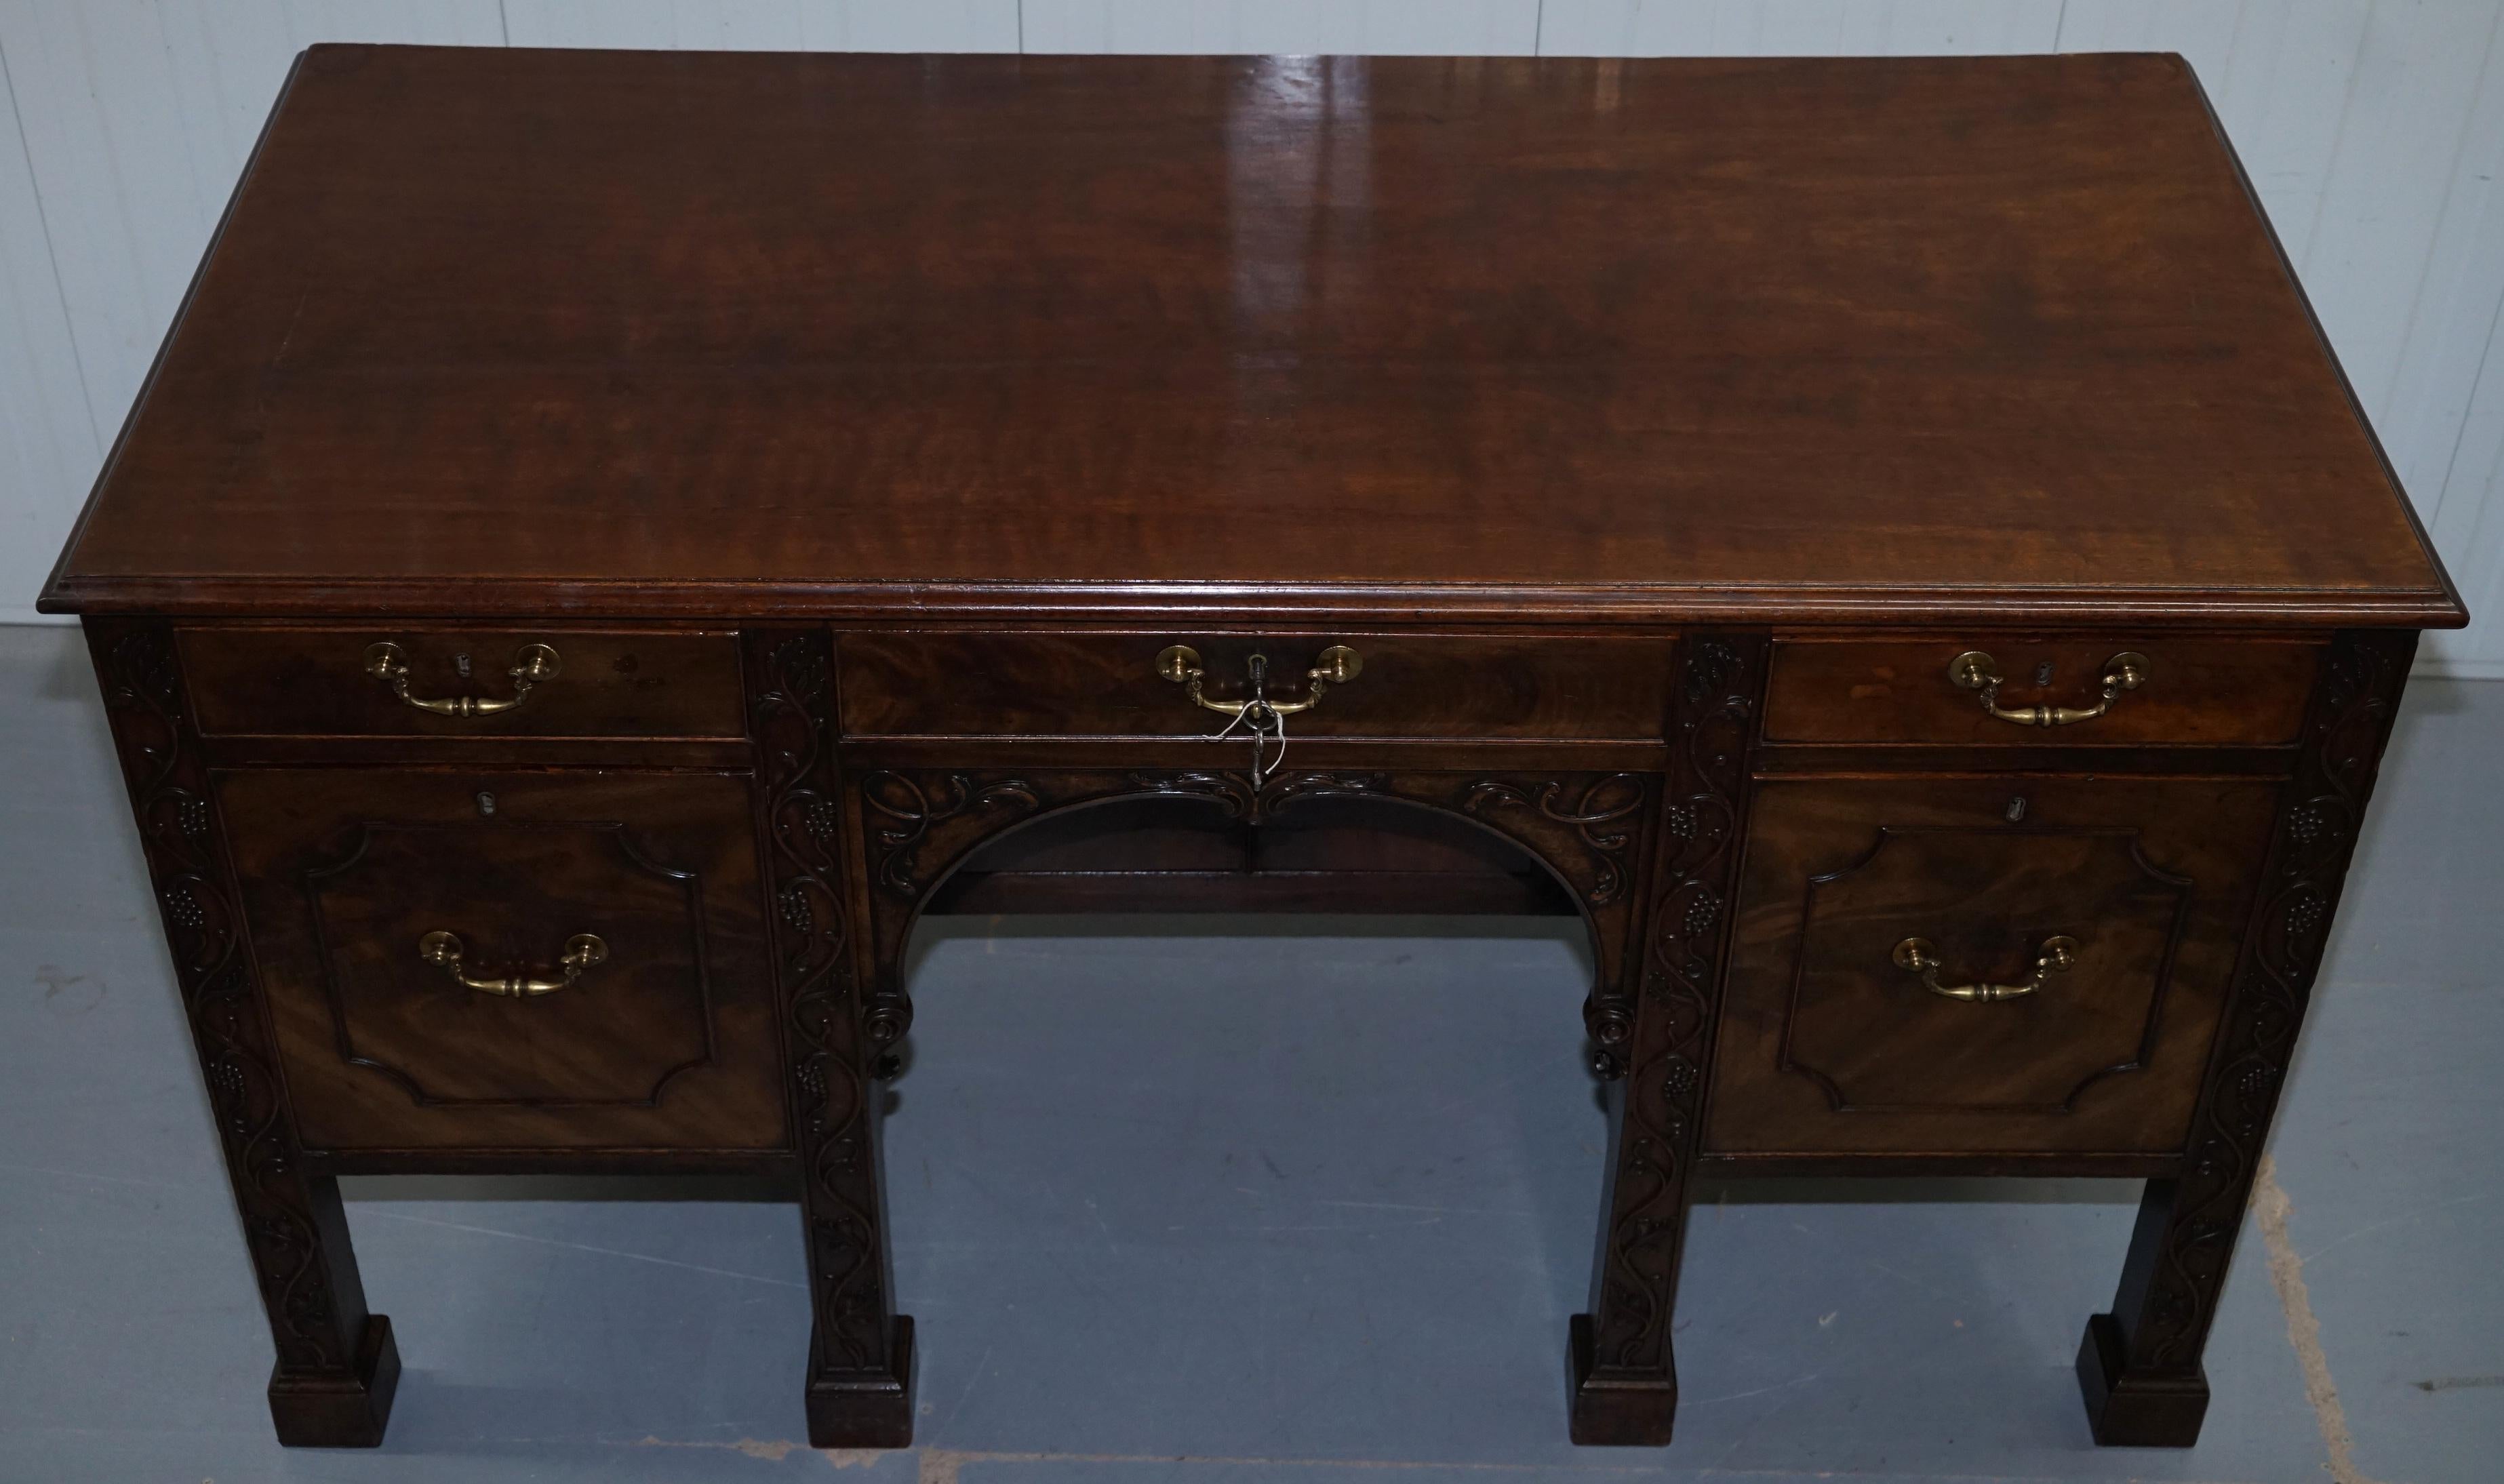 Hand-Crafted Viscountess Boyd's Ince Castle Rare George III Hardwood Sideboard Chippendale For Sale